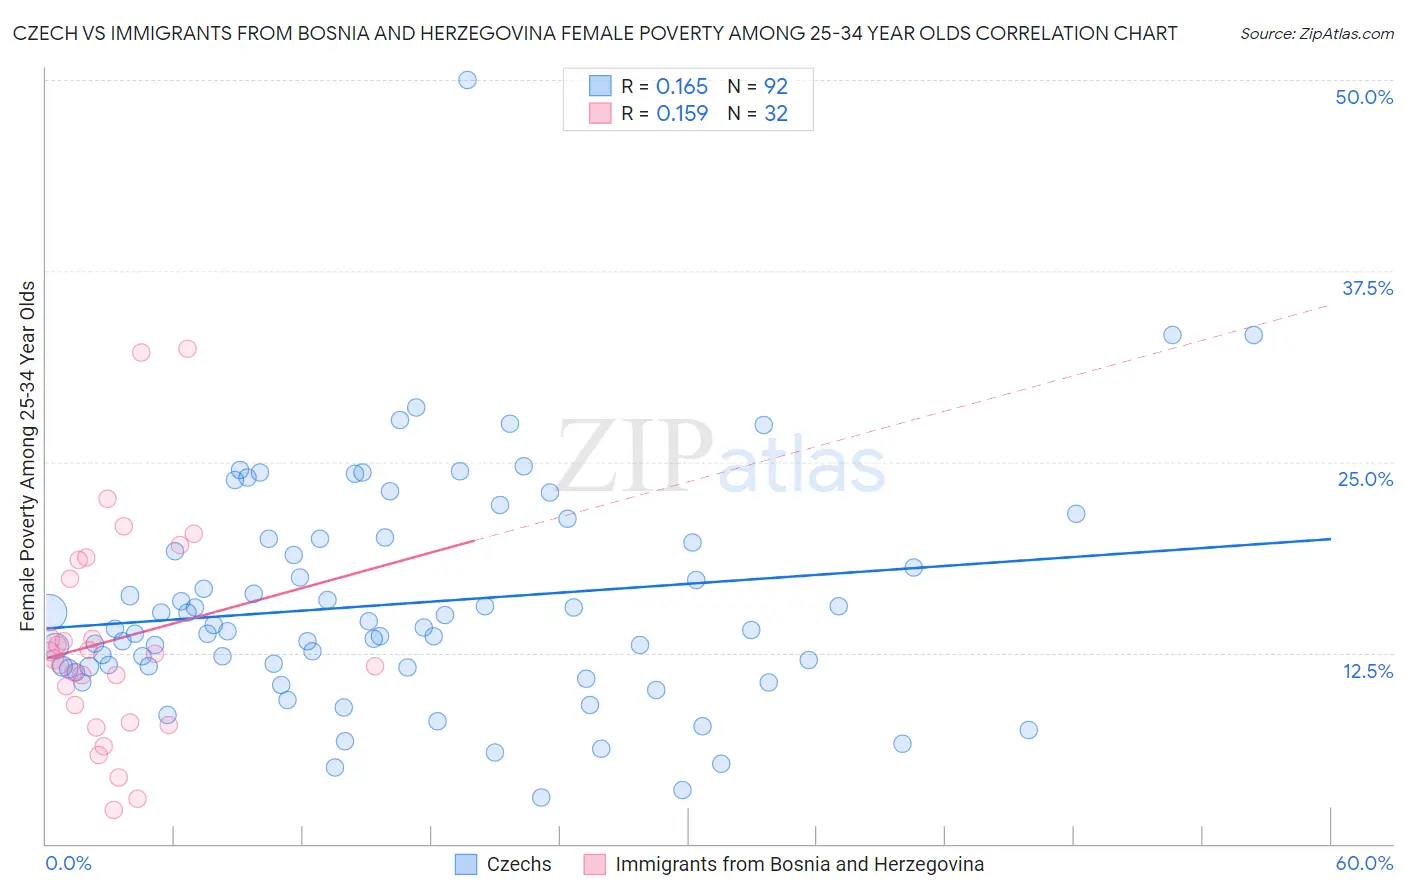 Czech vs Immigrants from Bosnia and Herzegovina Female Poverty Among 25-34 Year Olds